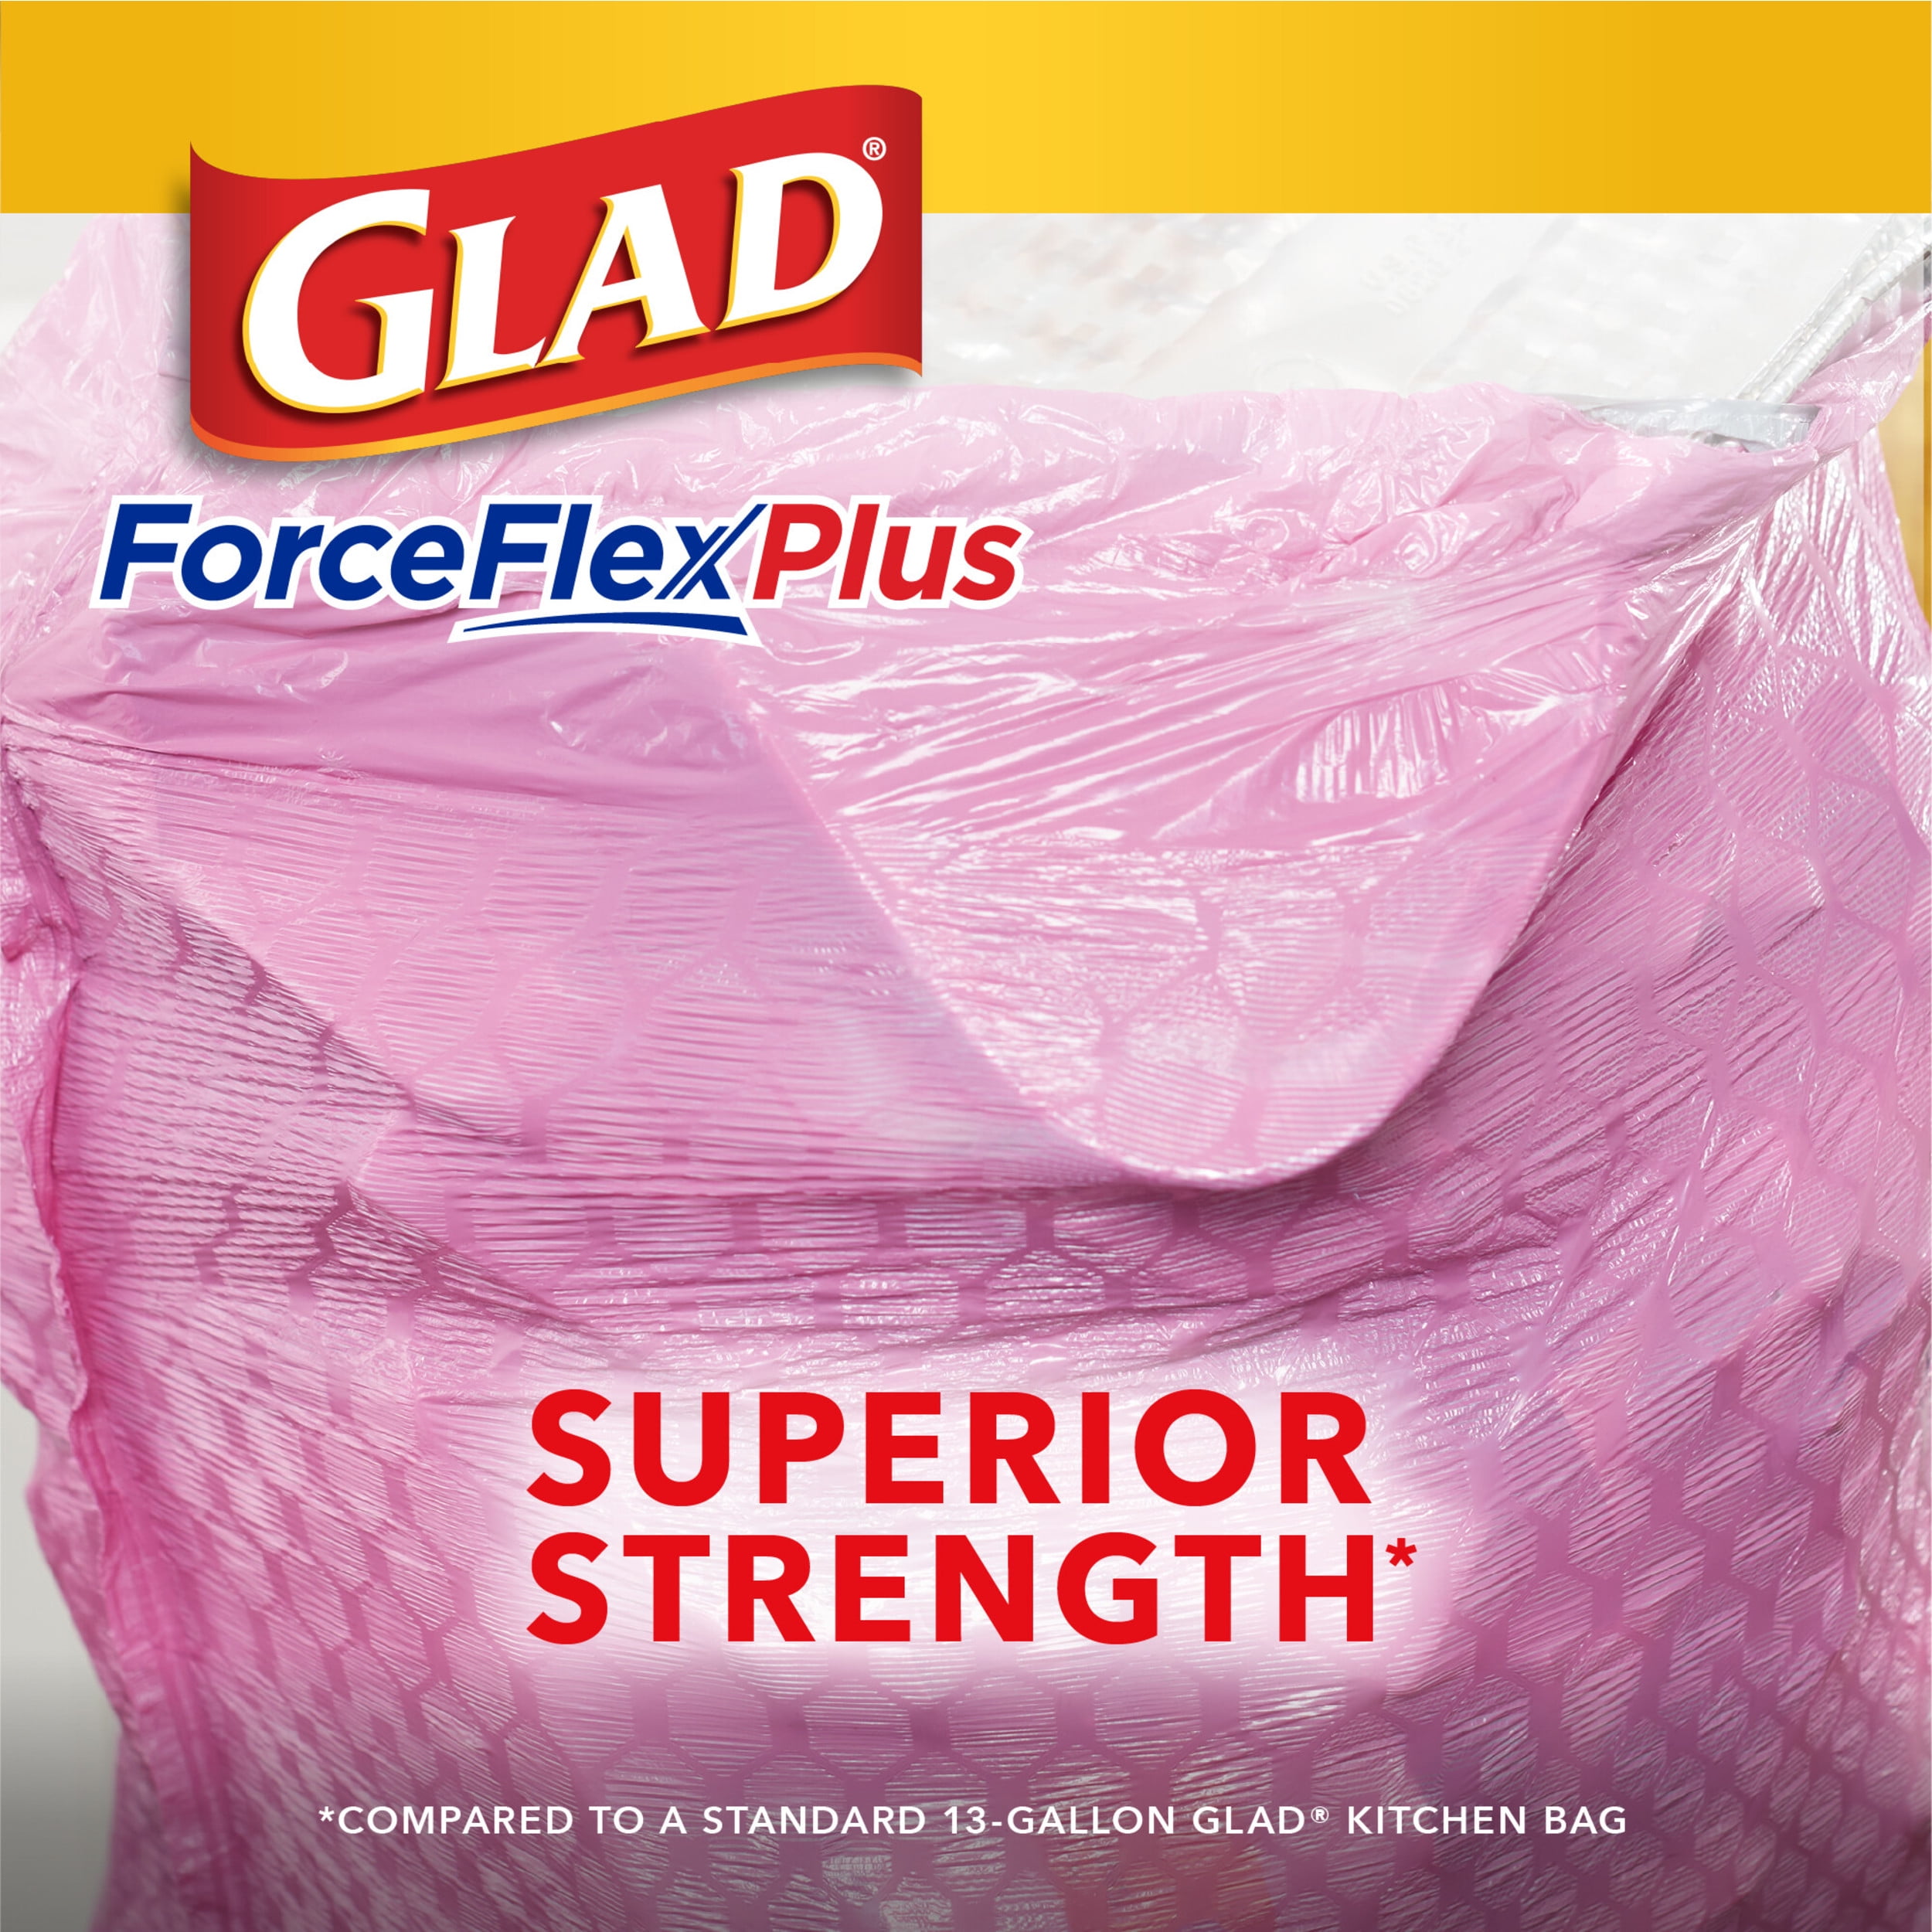 Glad ForceFlexPlus 13 Gallon Tall Kitchen Trash Bags, Cherry Blossom with Febreze, 40 Bags, Size: 40 ct